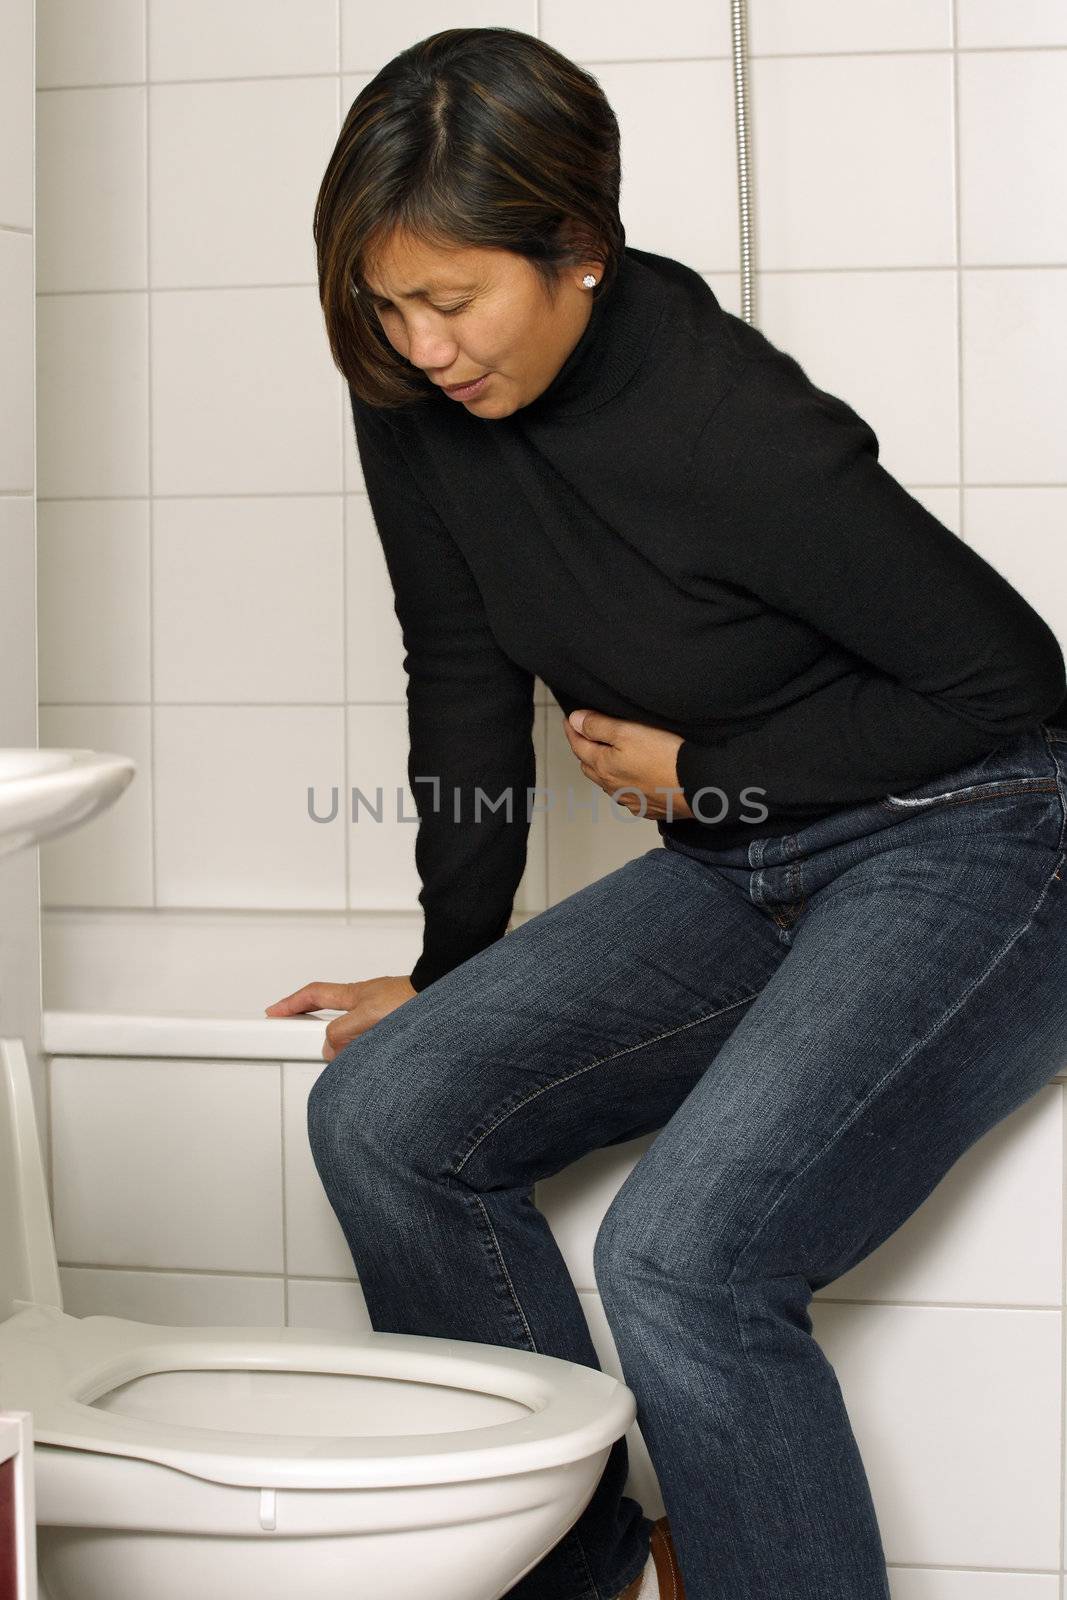 Asian woman with stomach sickness about to vomit into her toilet.
